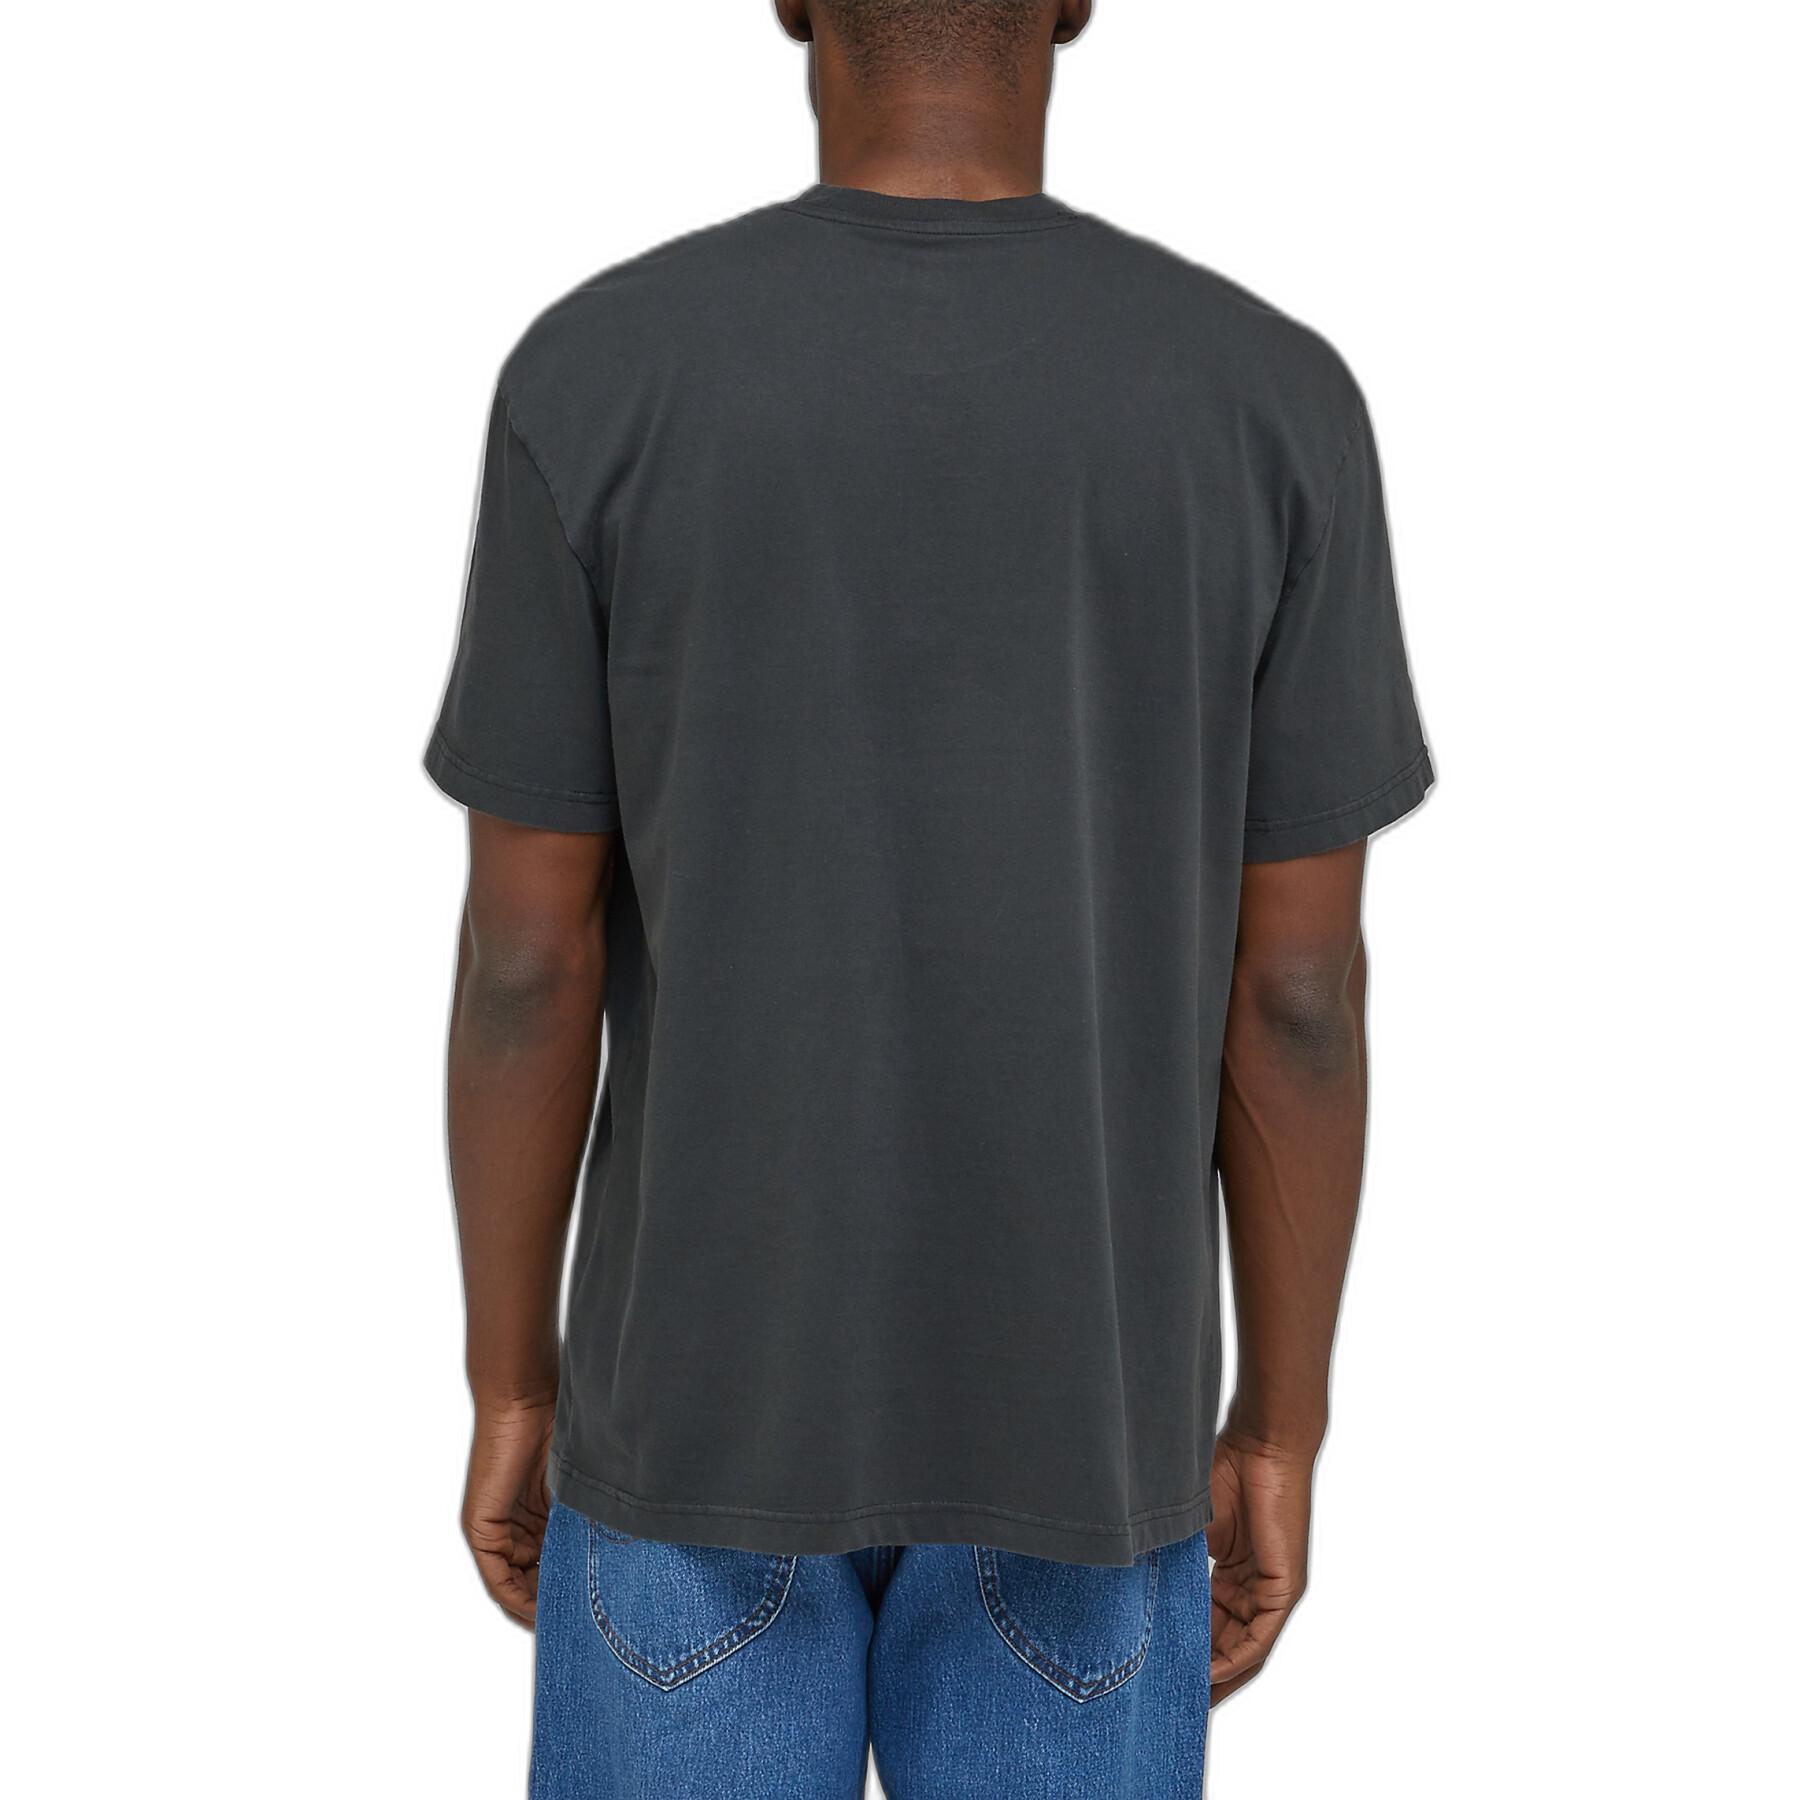 Loose-fitting T-shirt with pocket Lee